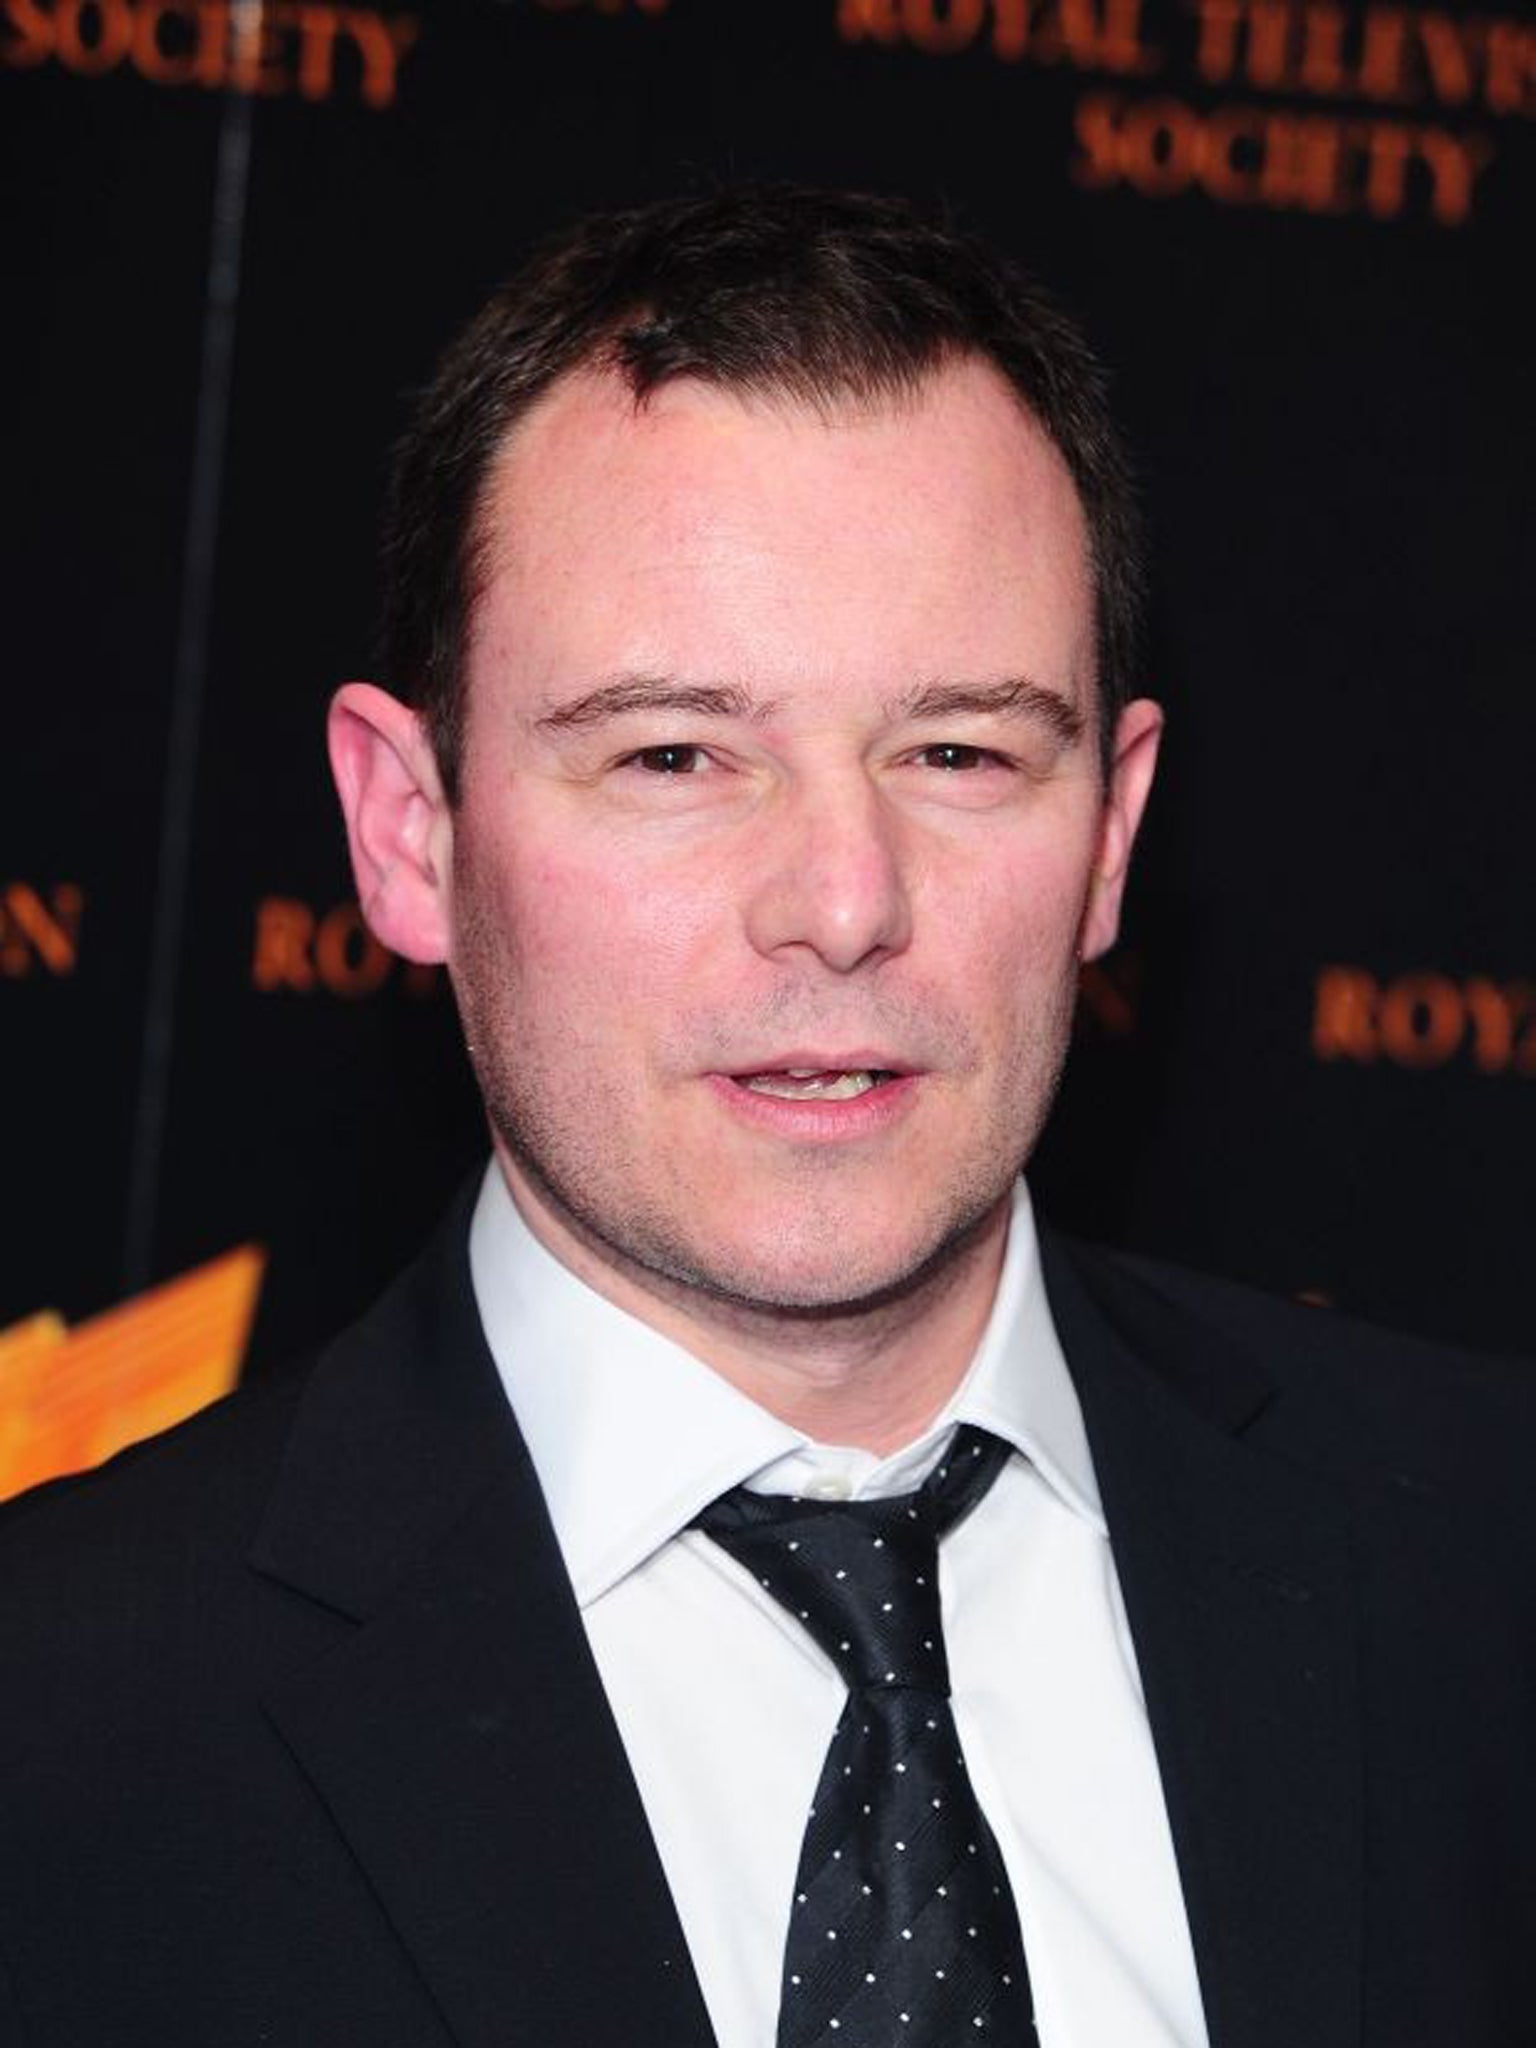 The actor Andrew Lancel, from Gateacre in Liverpool, is best known for his appearance as Frank Foster in the ITV soap Coronation Street